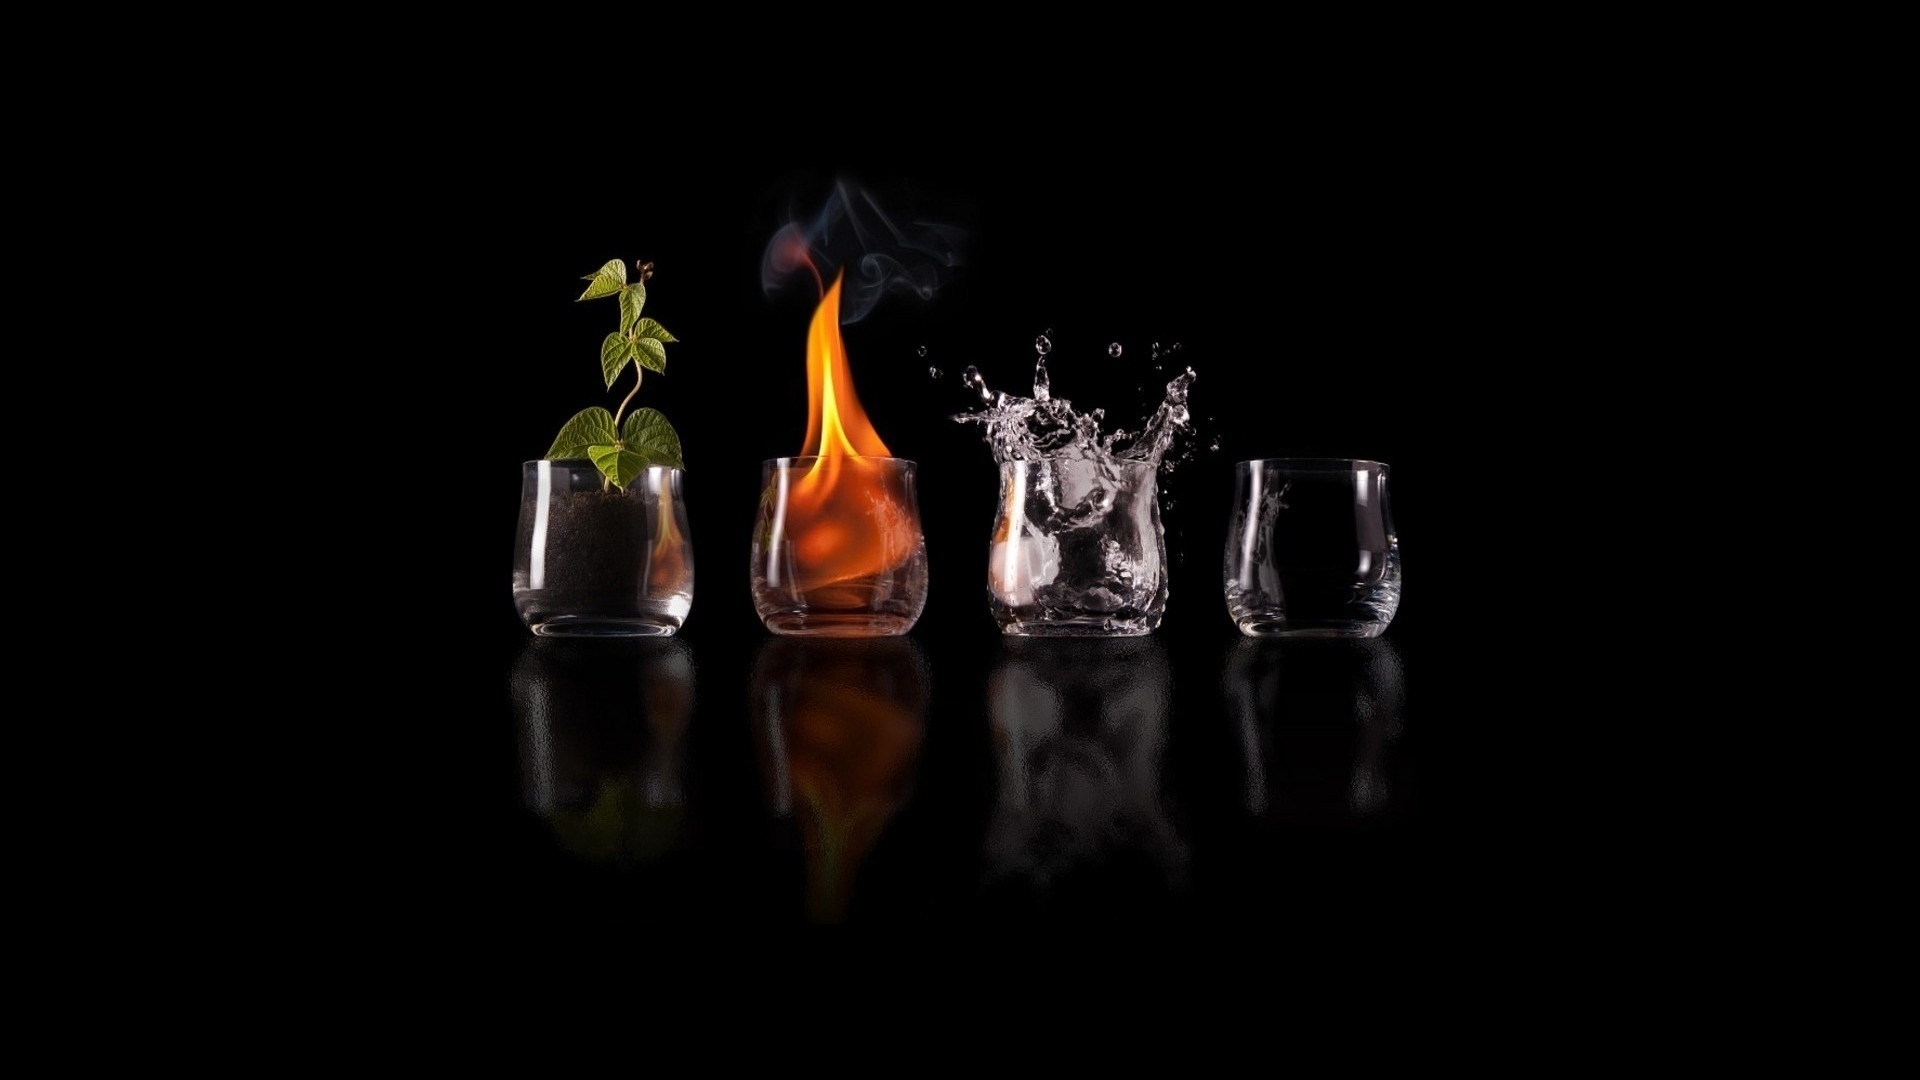 Wallpaper The elements earth fire, water, air, drinks om glasses